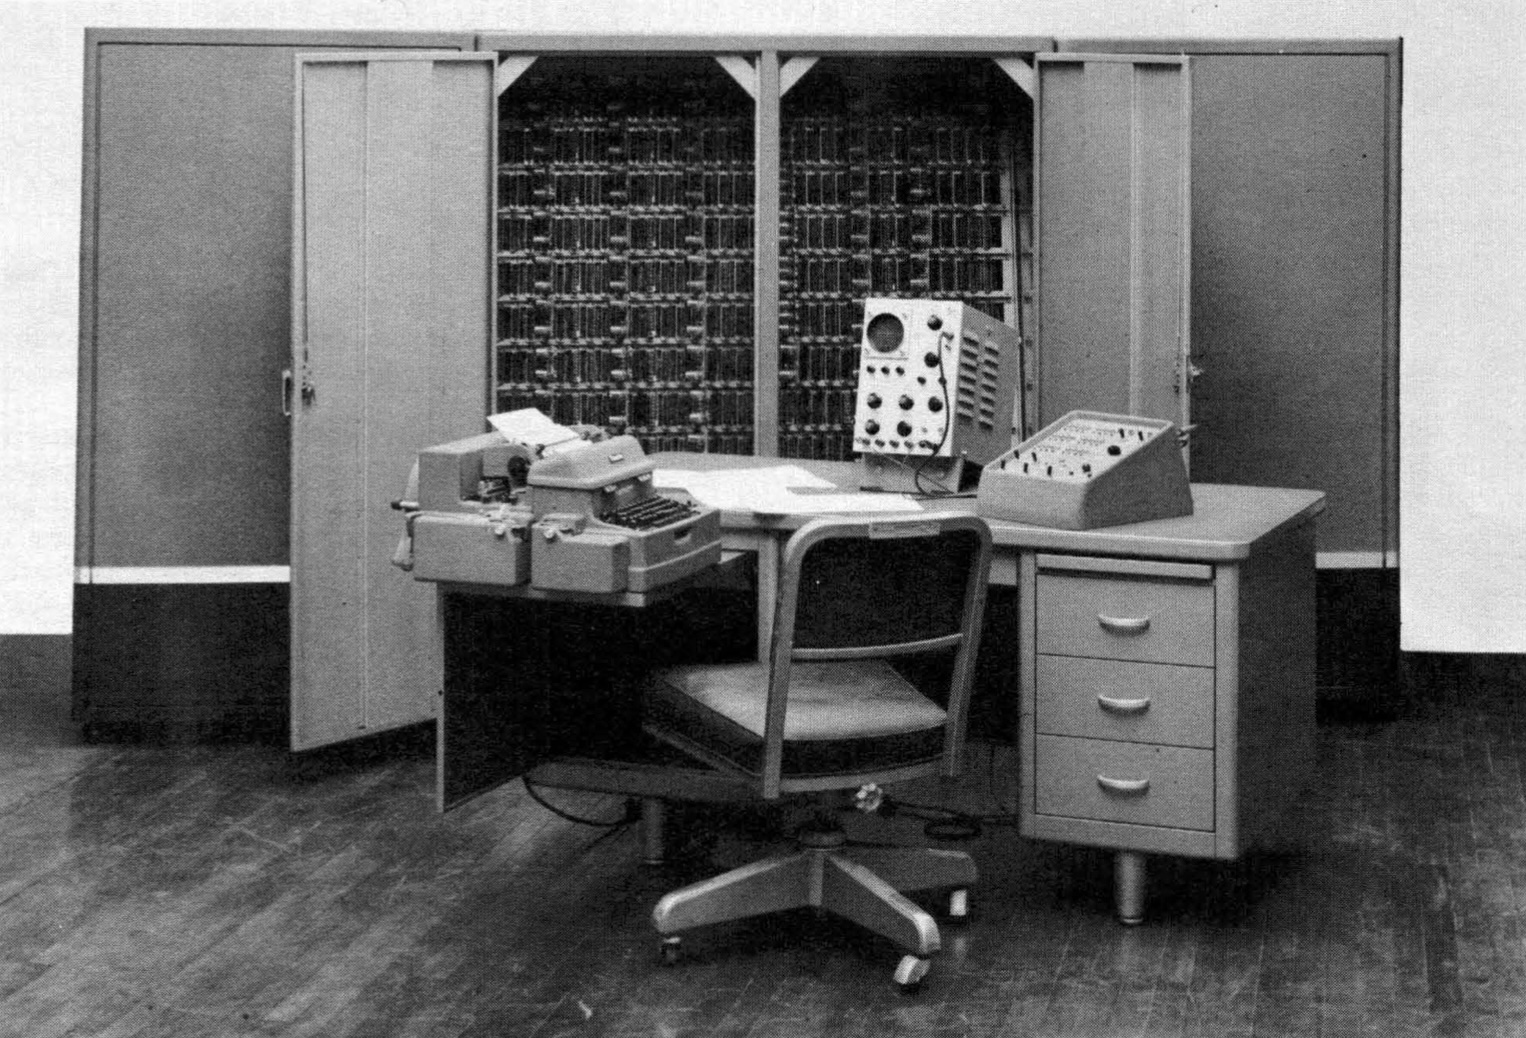 A photograph of a bare-bones ALWAC III-E. The operator desk in the foreground holds the
                         Flexowriter used for input and out, the control console, and an oscilloscope. In the background
                         are four cabinets housing storage and processor units.